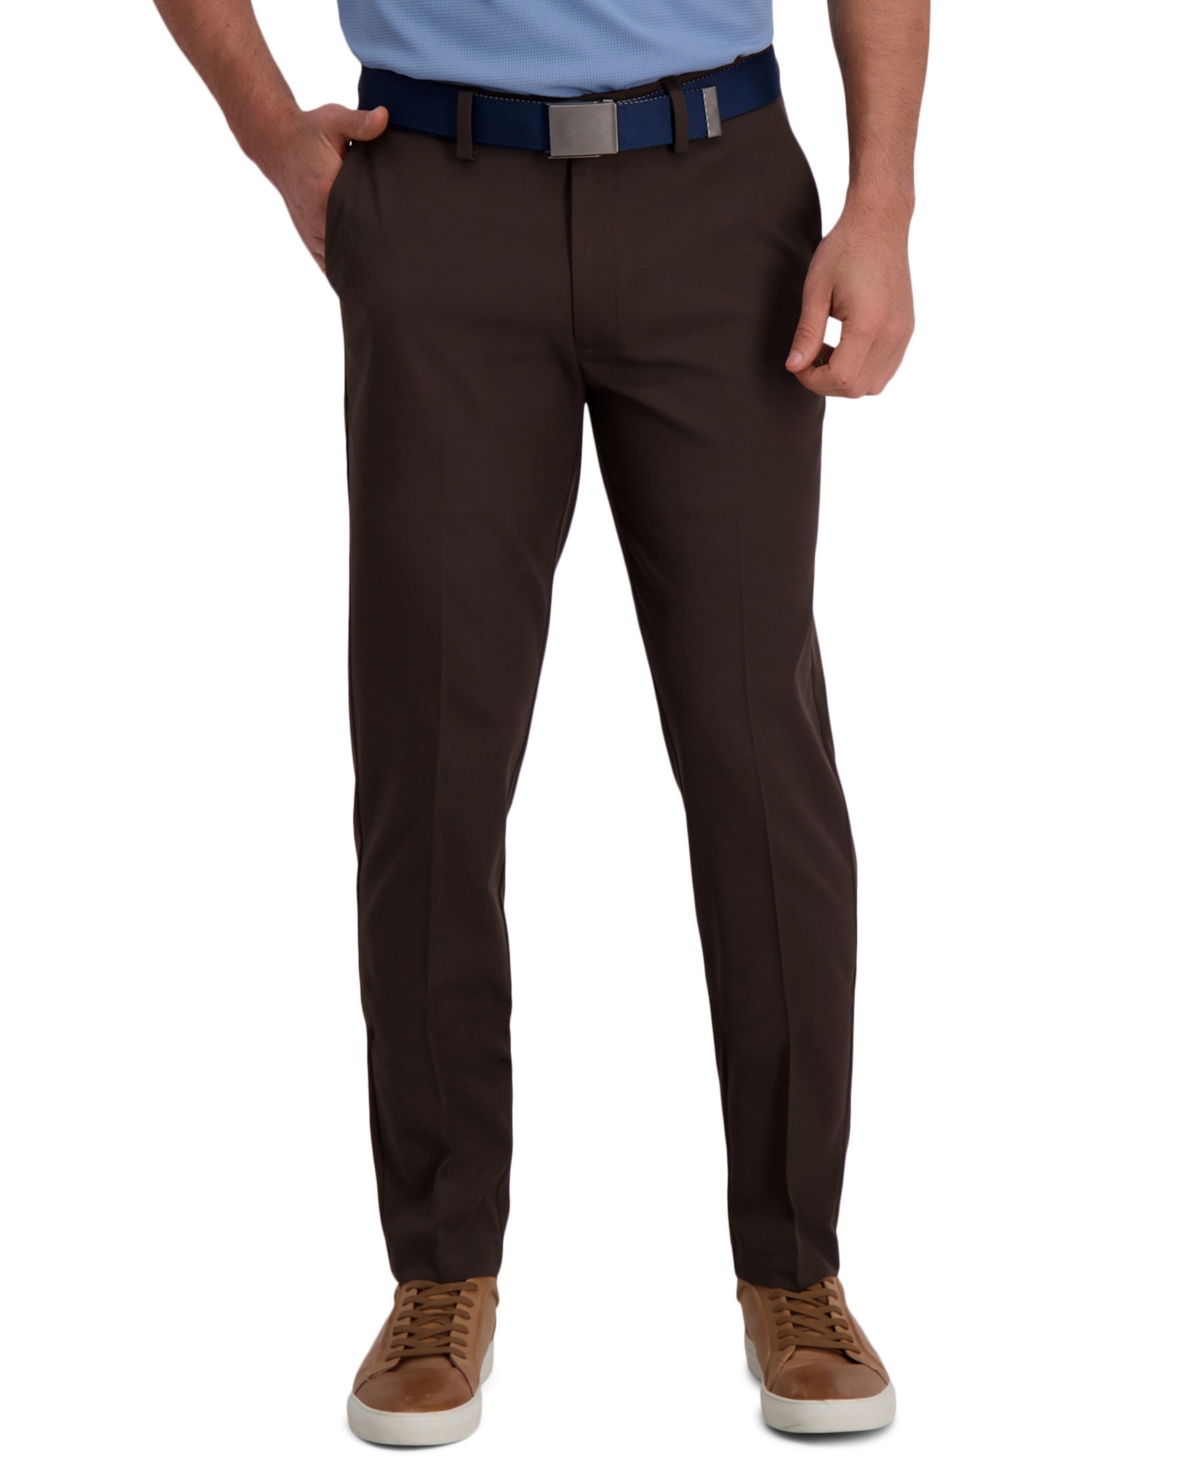 Cool Right Performance Flex Slim Fit Flat Front Pant - String